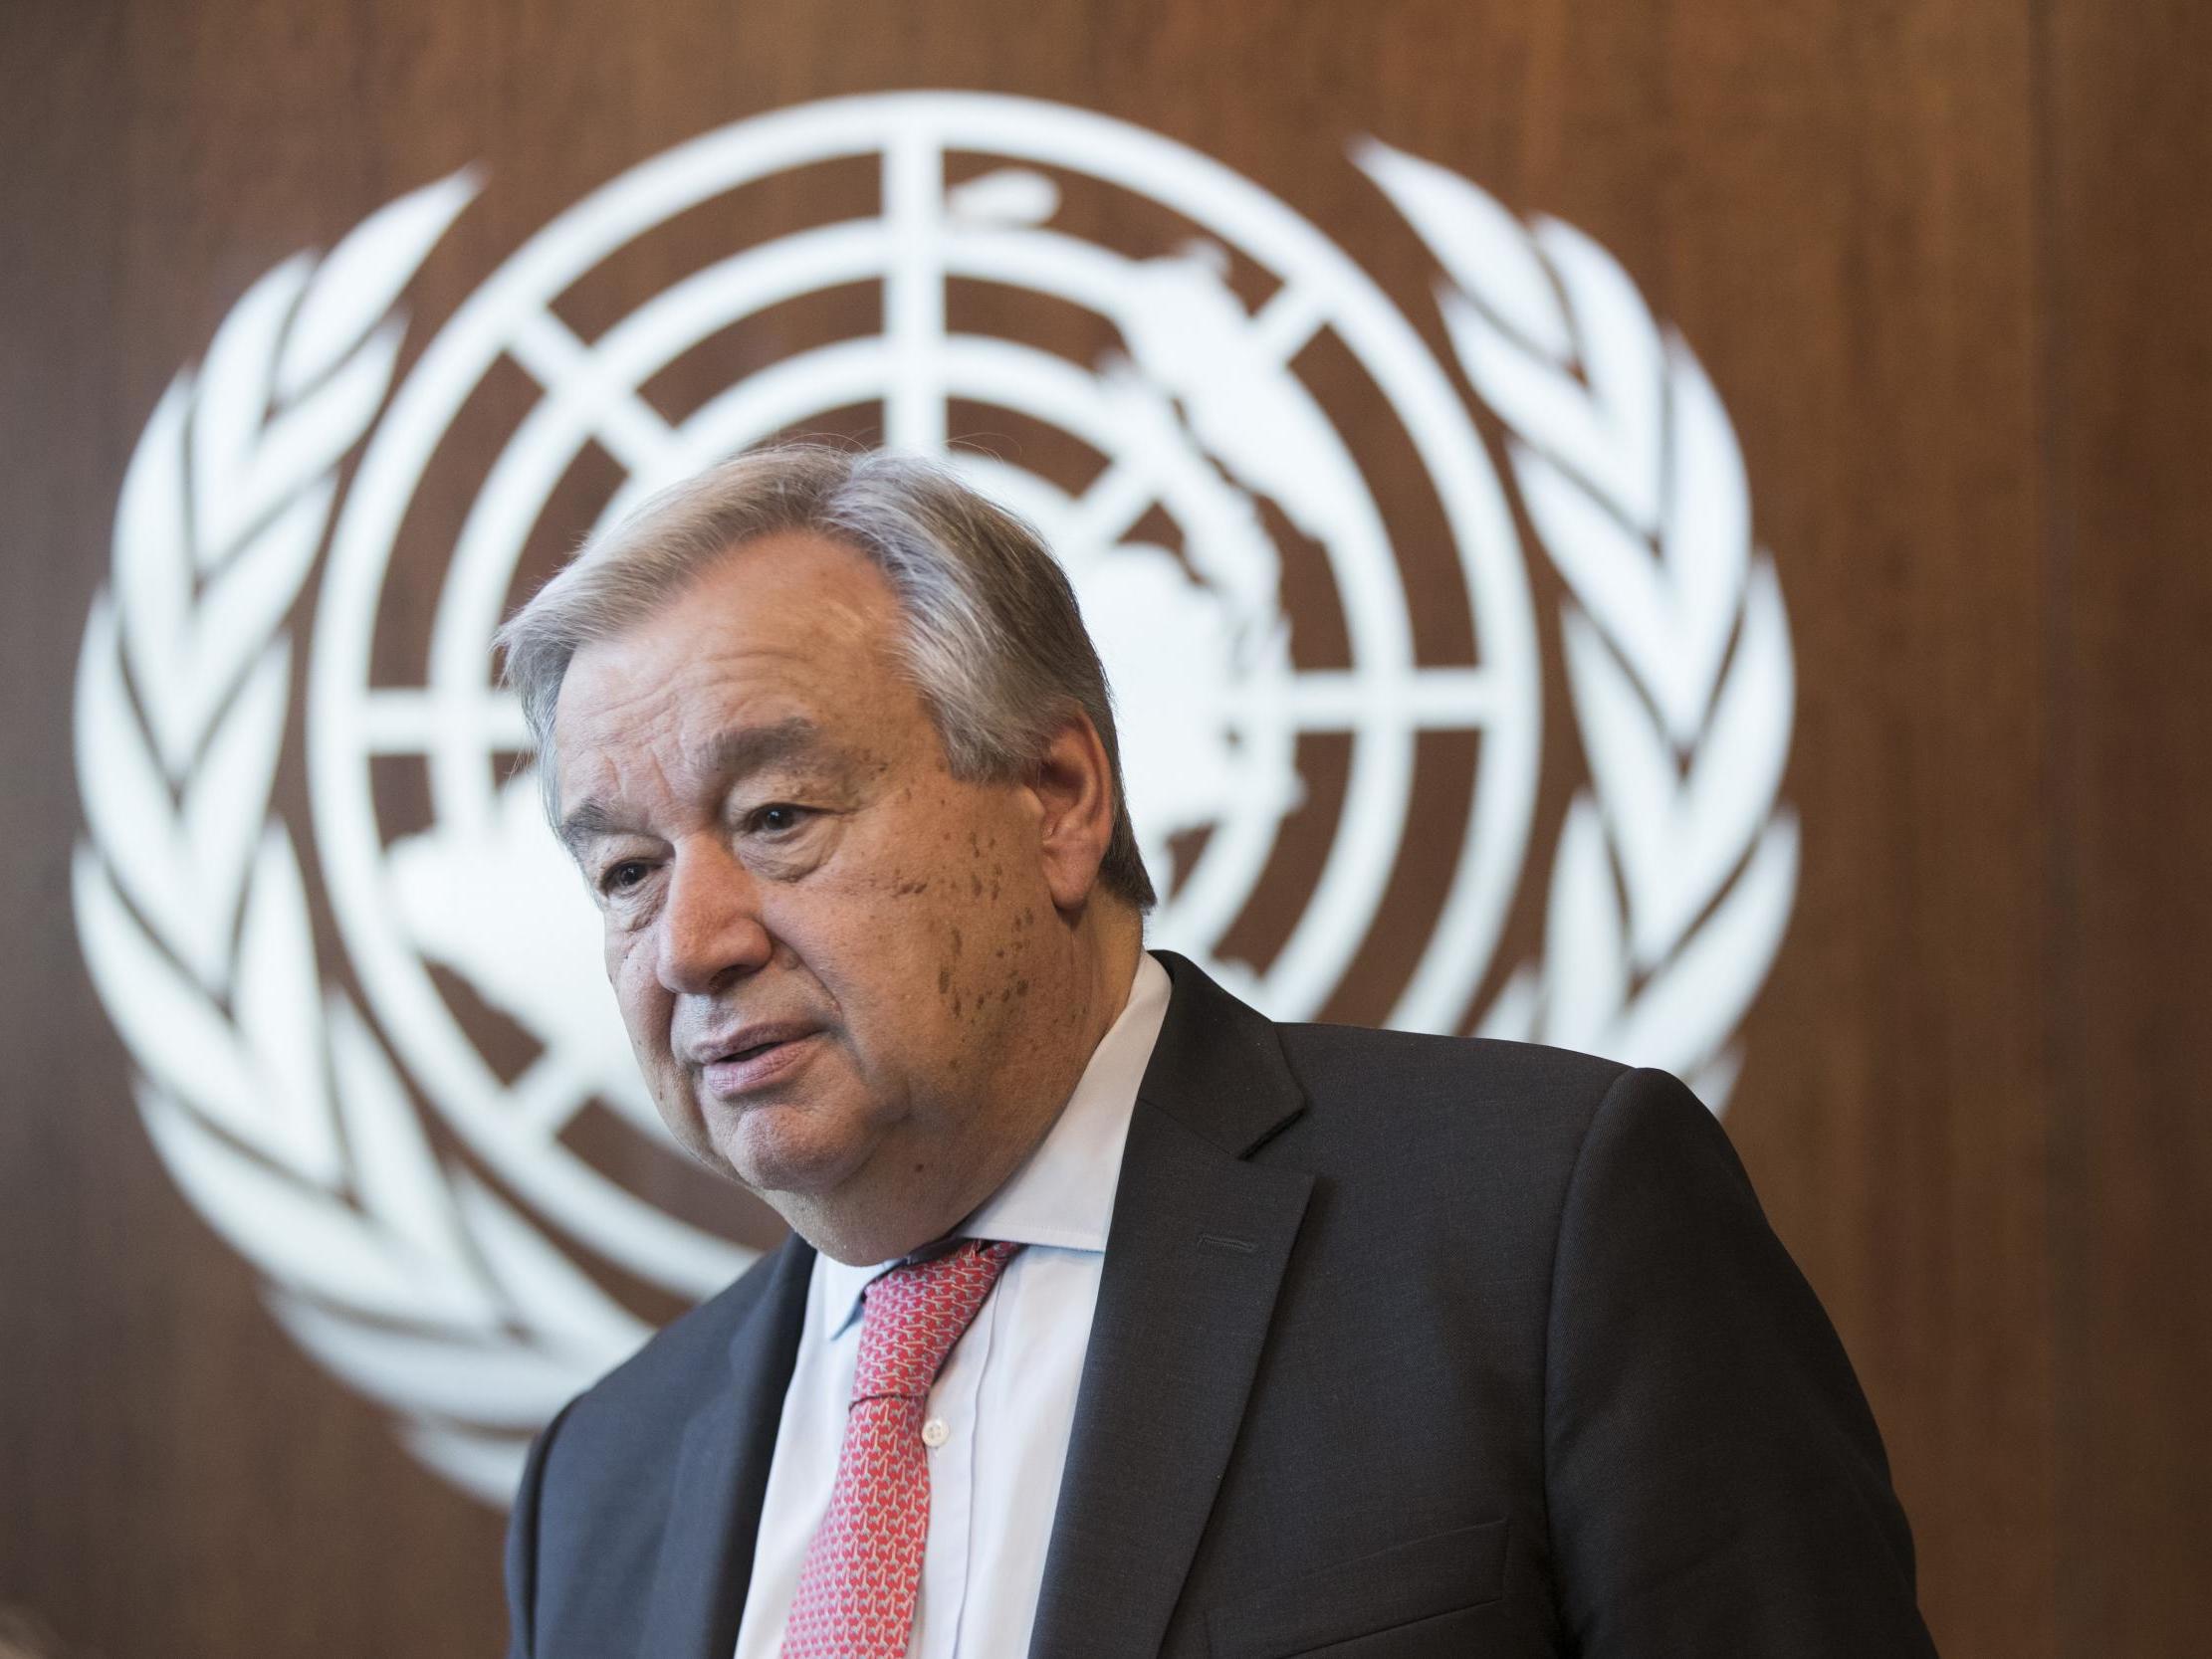 The UN secretary-general is visiting countries in the South Pacific